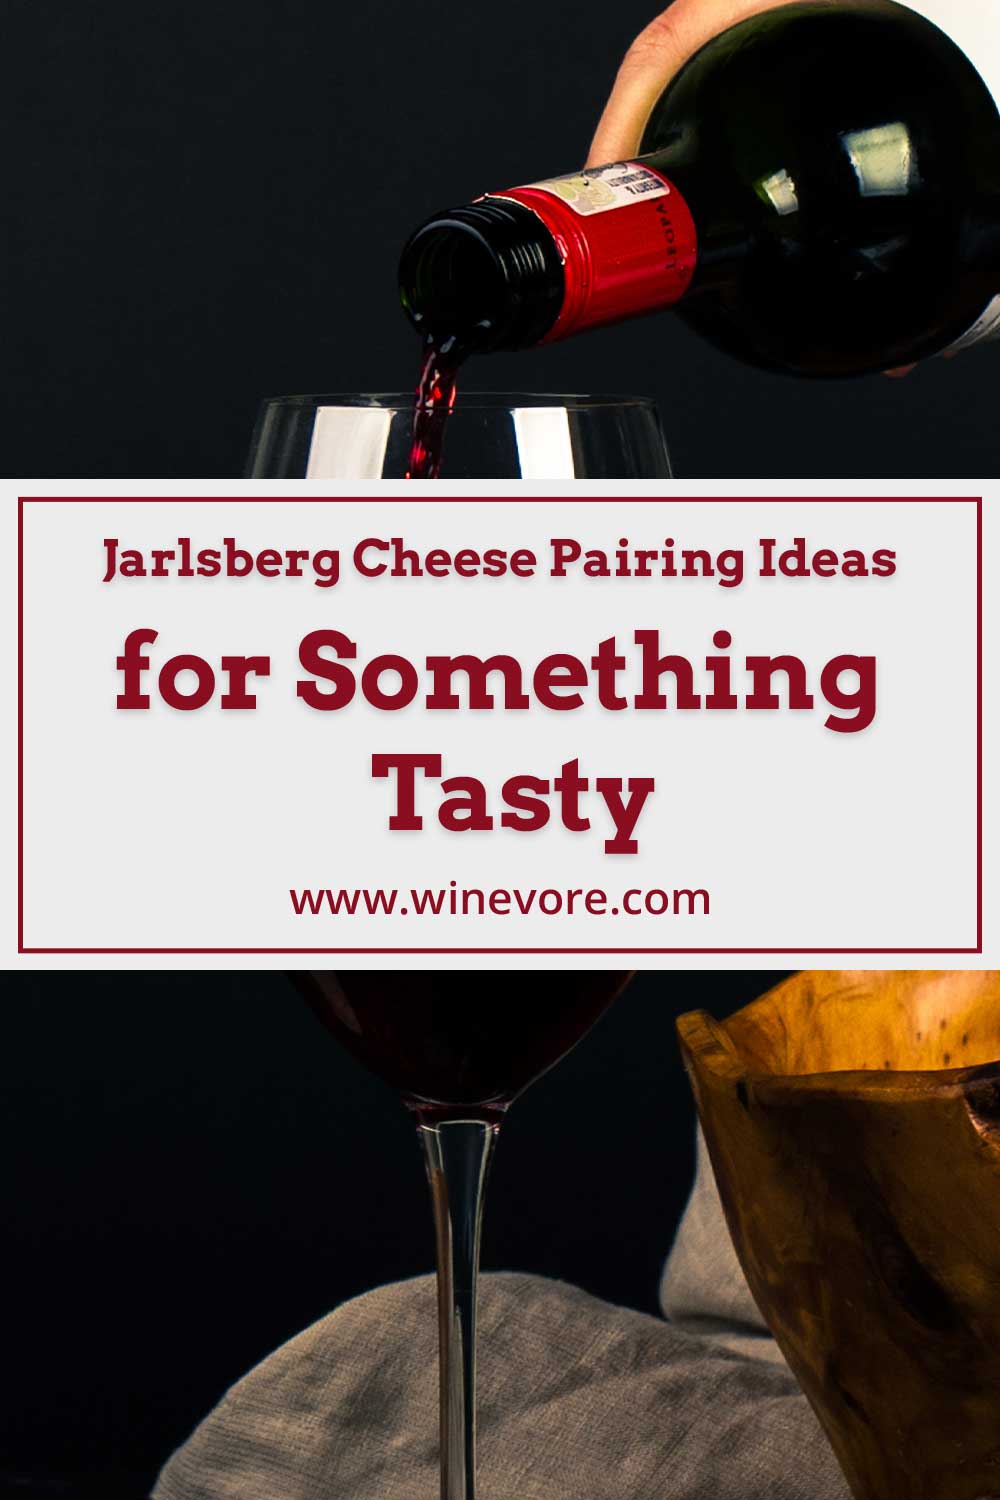 Wine being poured into a glass - Jarlsberg Cheese Pairing Ideas.